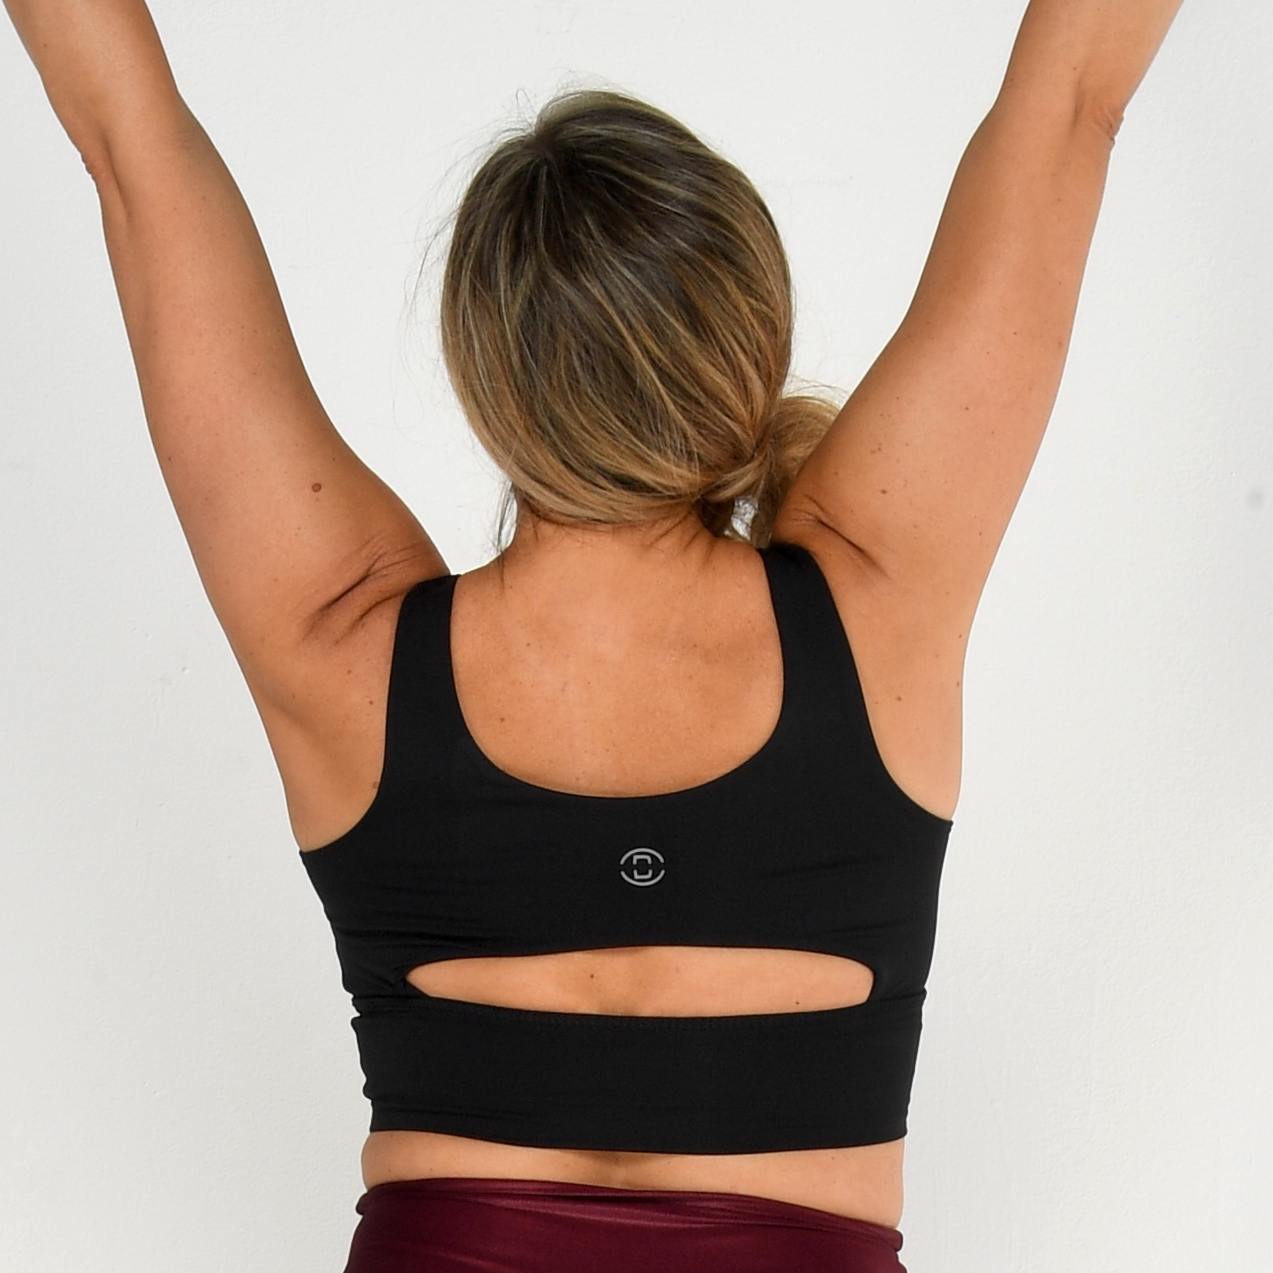 DYI CLOTHING Elevate Women's Sports Bra on simplyWORKOUT